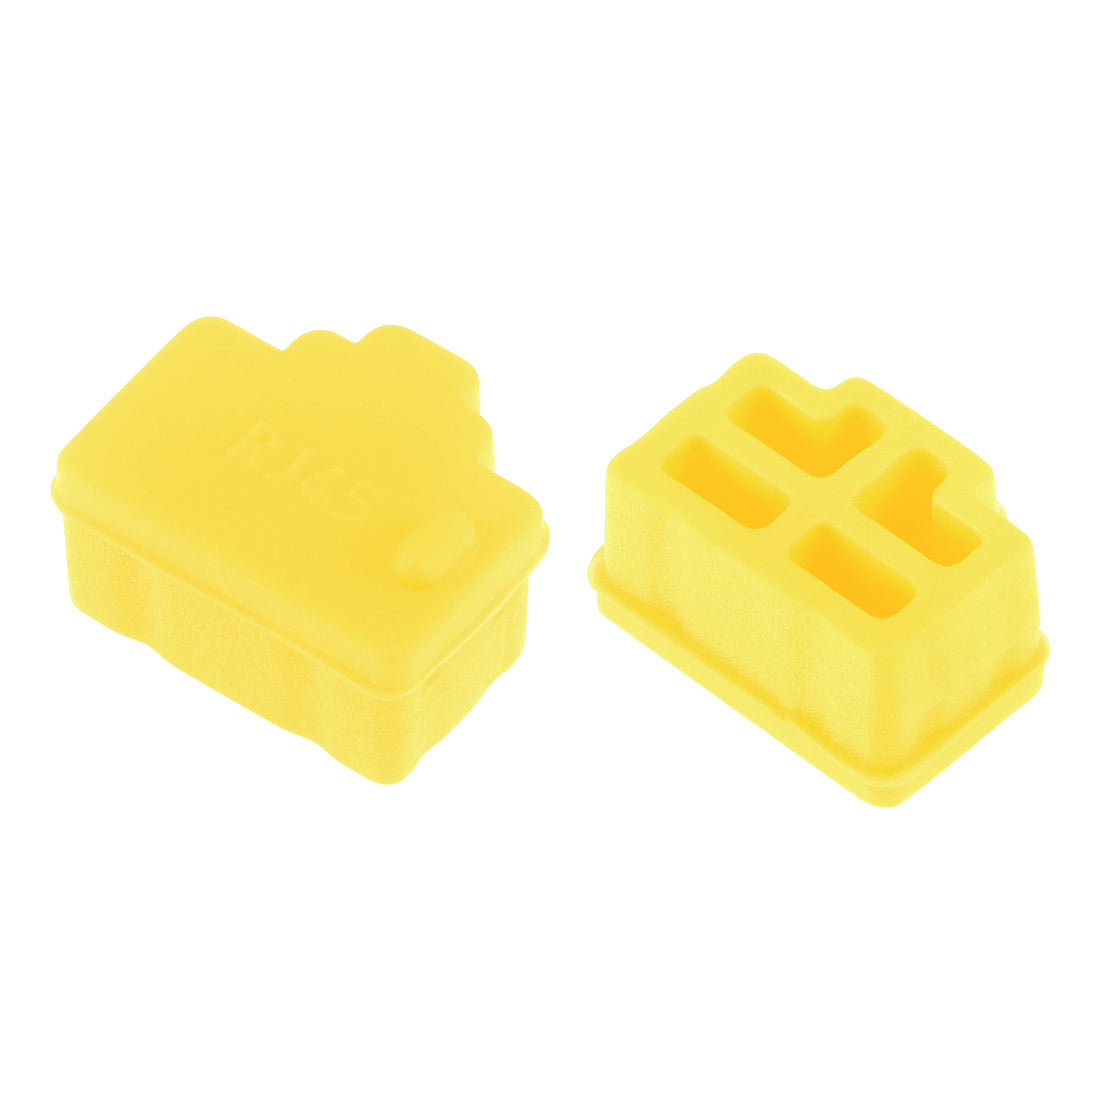 uxcell Uxcell 20pcs RJ45 Silicone Protectors Ethernet Hub Port Anti Dust Cap Cover, Yellow